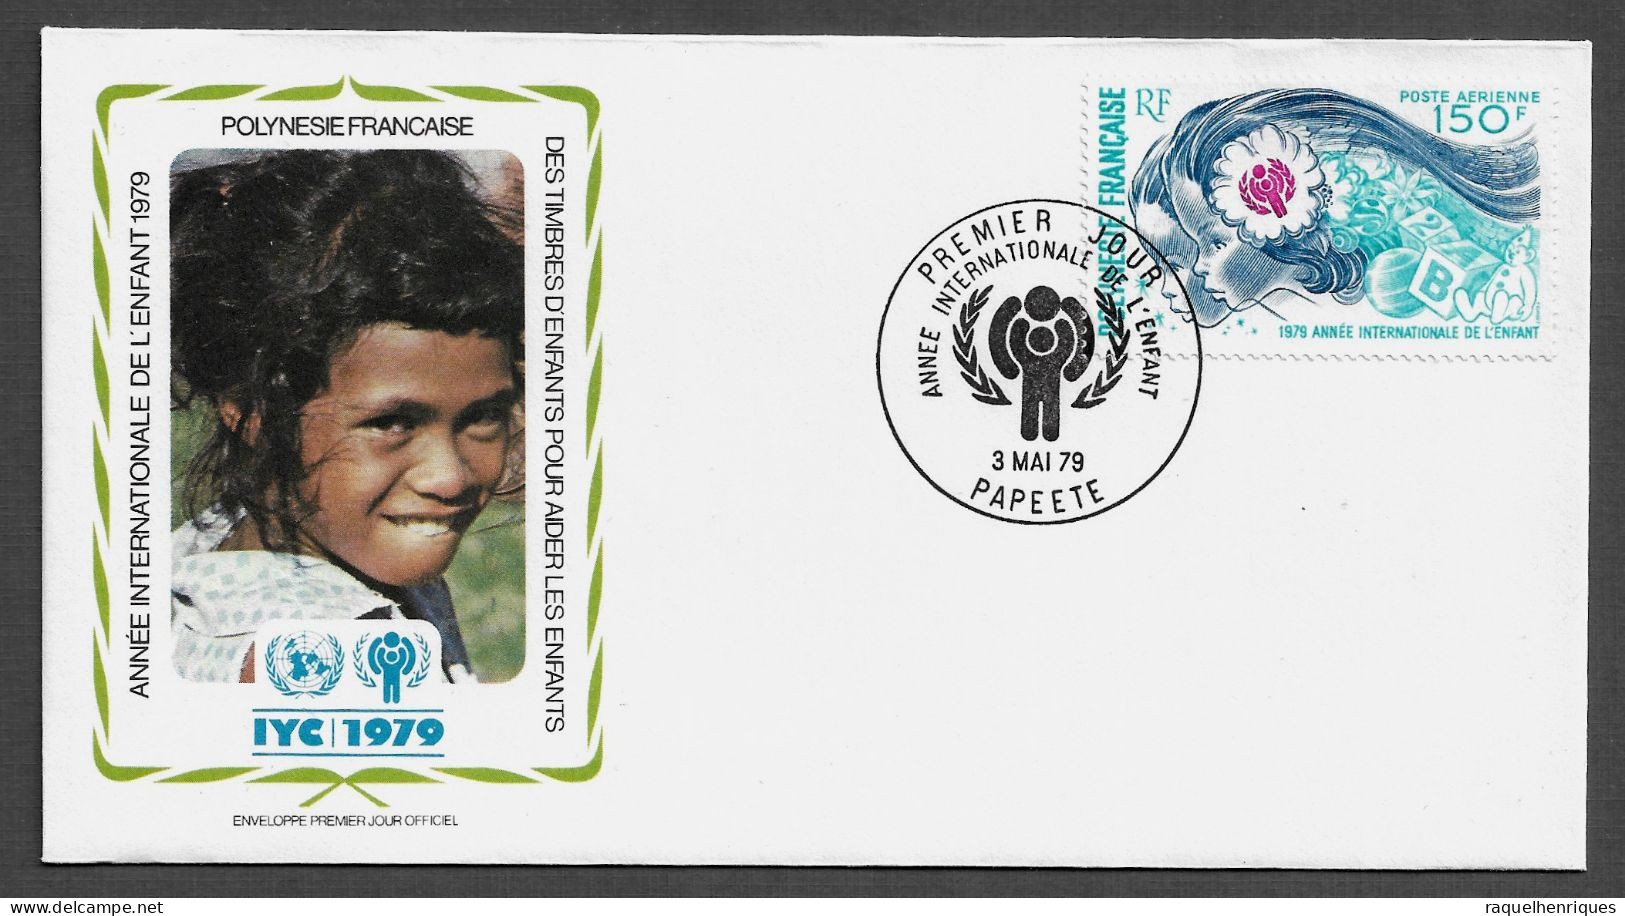 FRENCH POLYNESIA FDC COVER - 1979 International Year Of The Child SET FDC (FDC79#07) - Covers & Documents